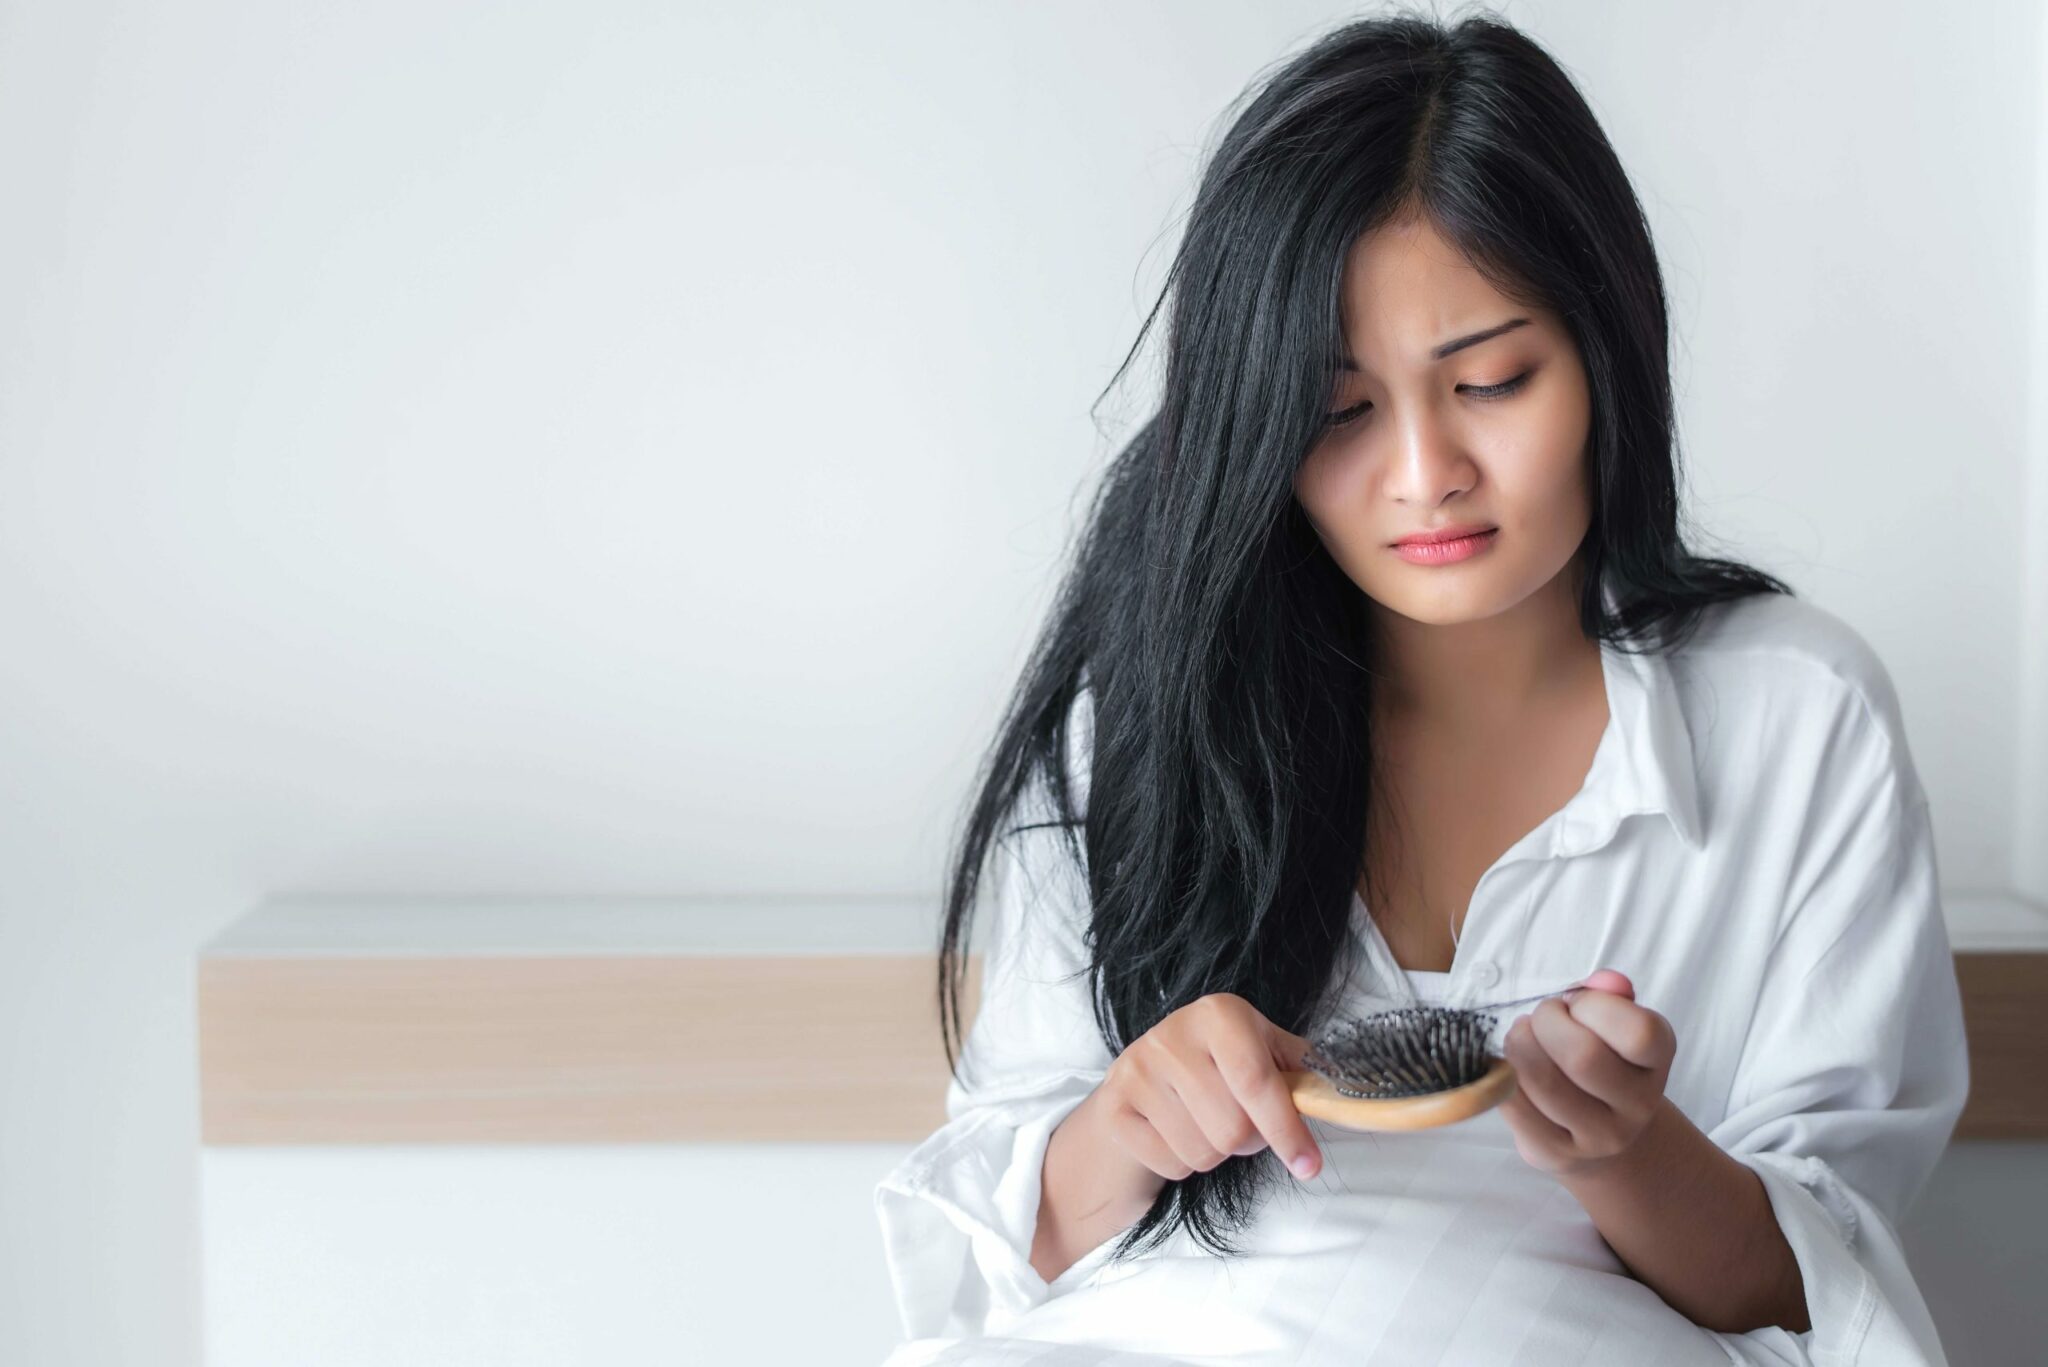 Coping With PCOS Hair Loss - NabtaHealth - Women's Health and Wellness